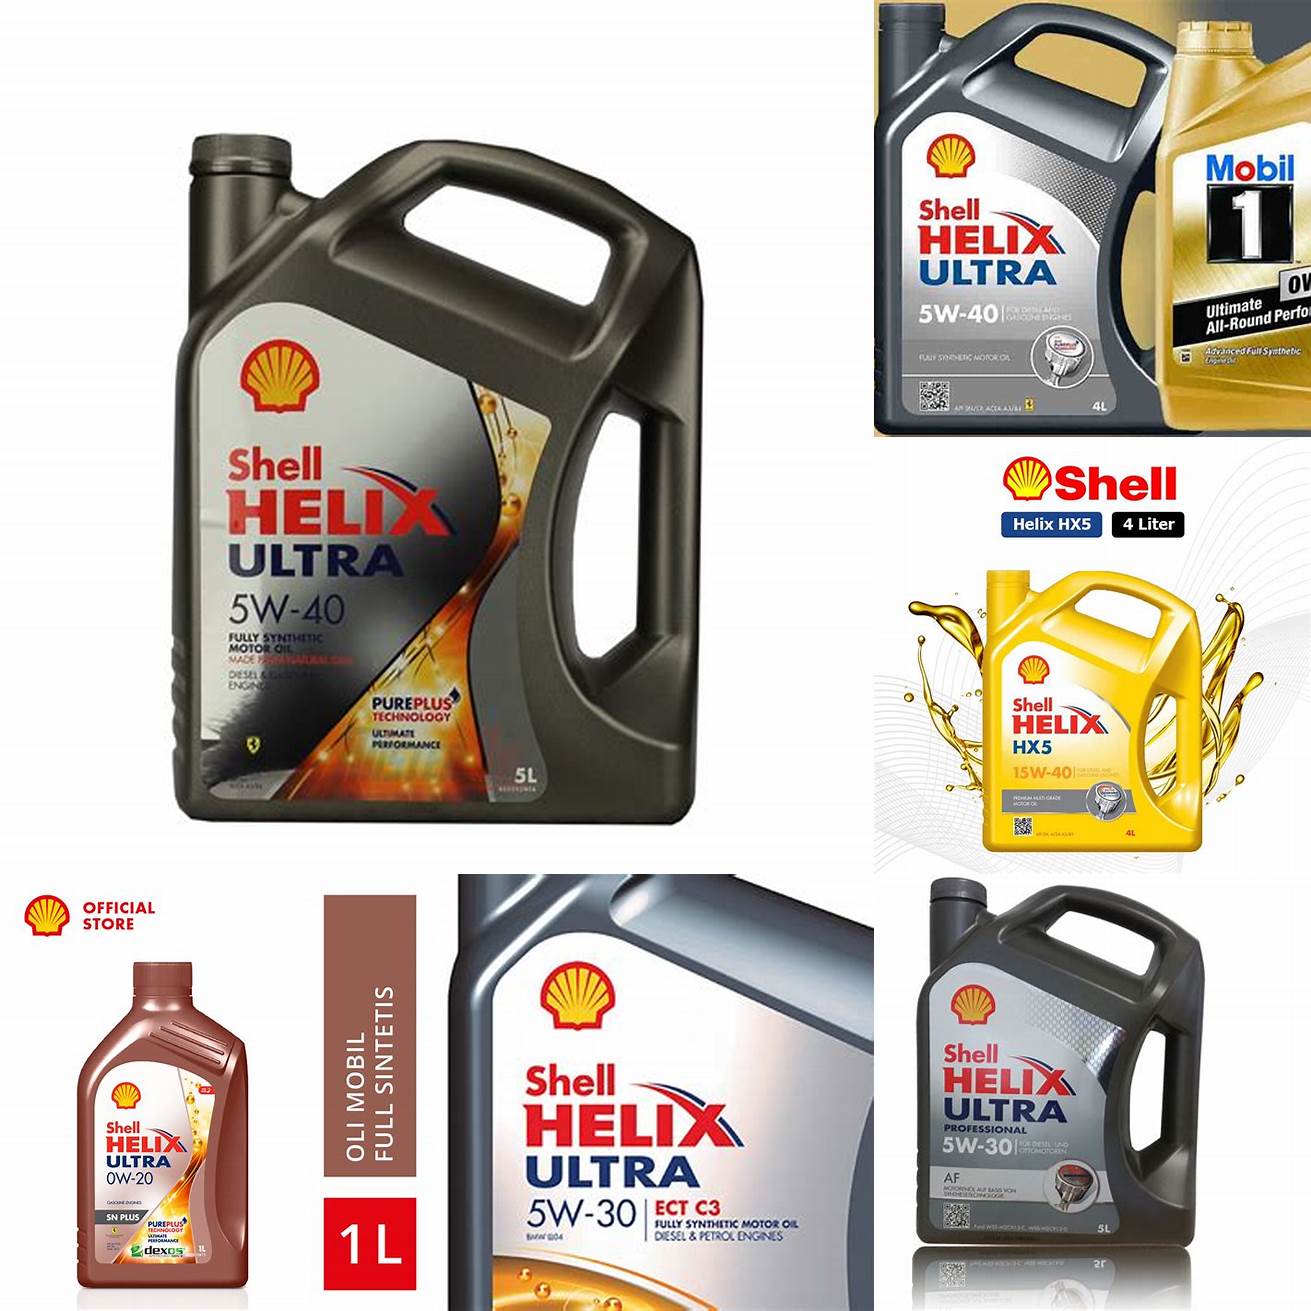 1 Shell Helix Ultra Coolant